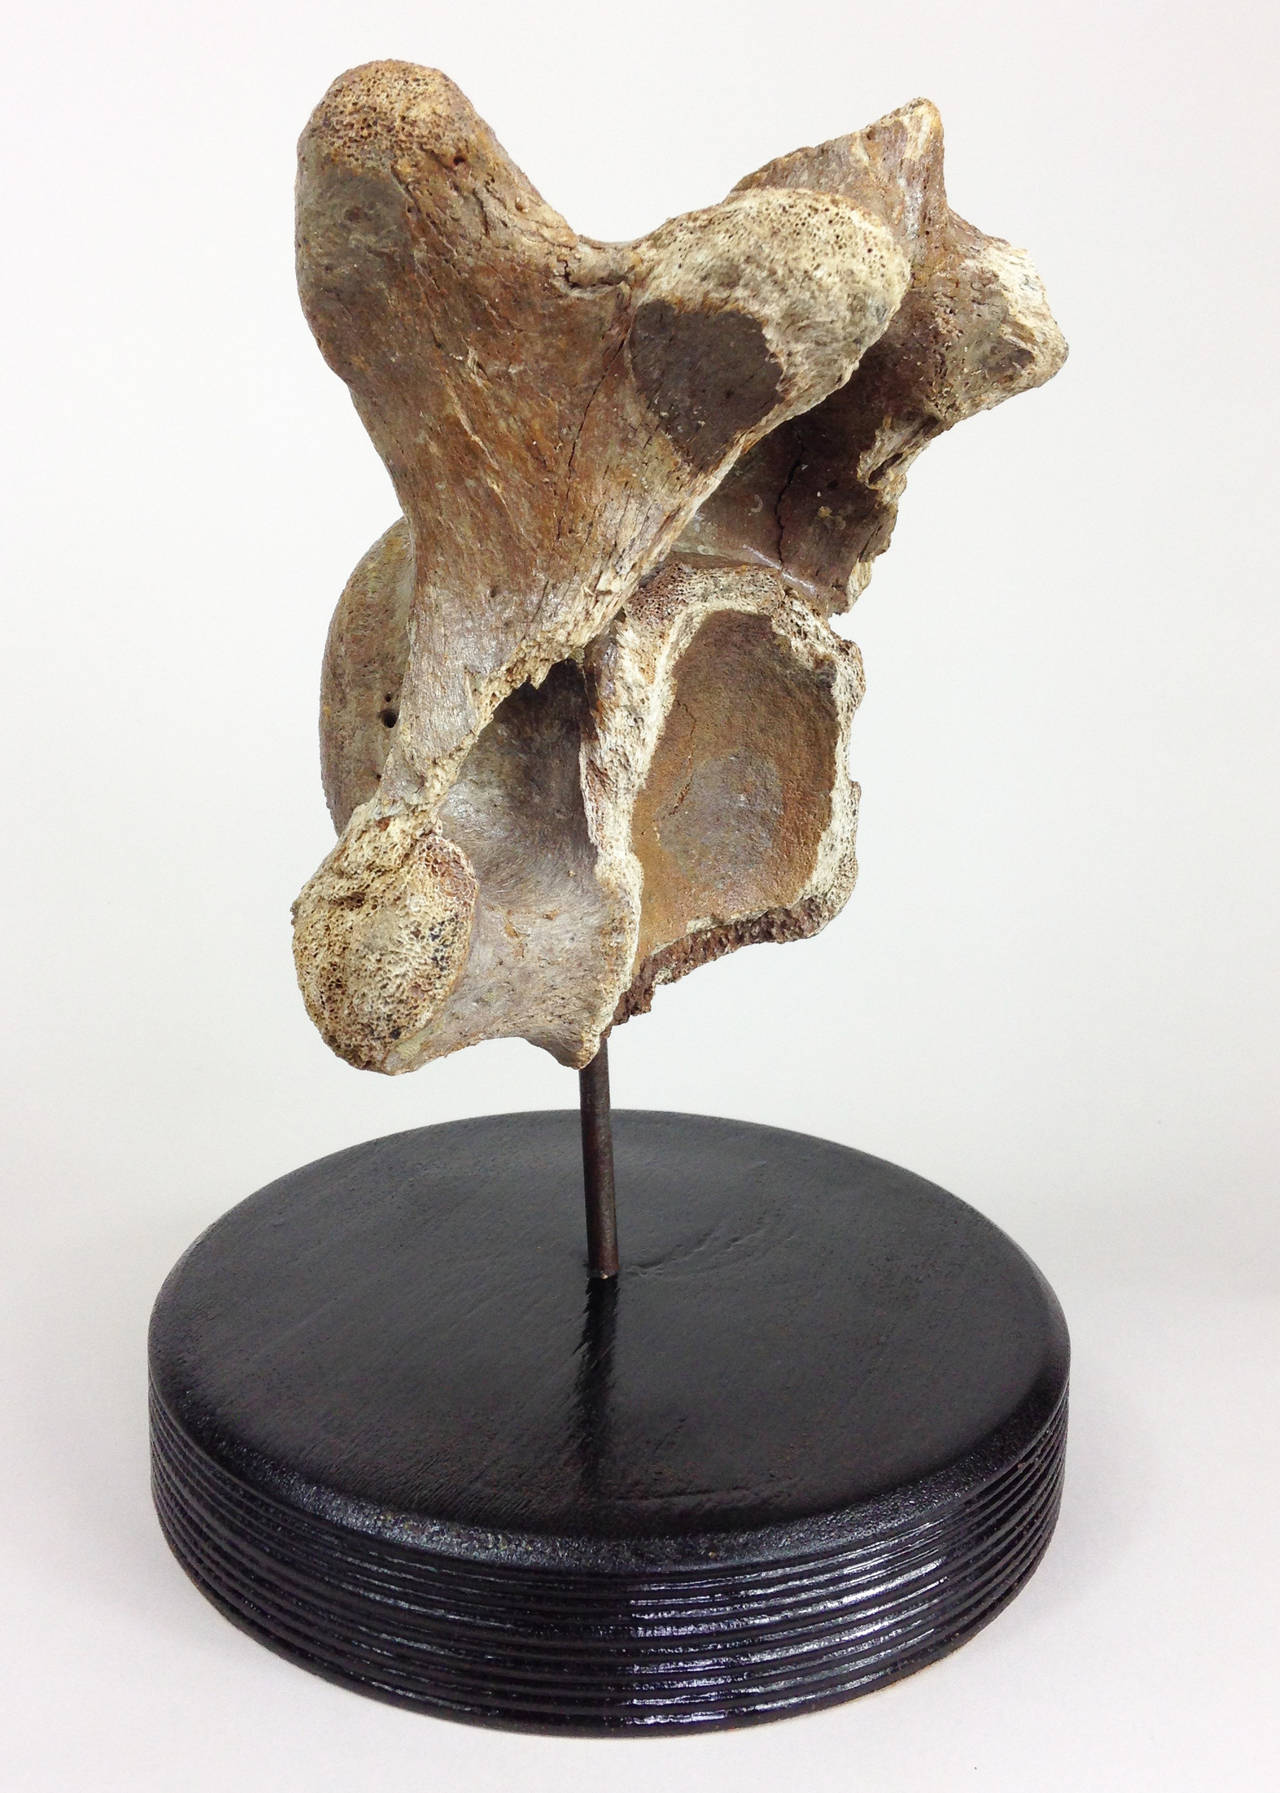 A good example of a woolly rhinoceros (Coelodonta Antiquitatis) vertebra mounted on a turned wooden base.

These enormous creatures lived during the Pleistocene period-2,600,000 to 15,000 years ago and could grow up to 12 feet in length with a 3